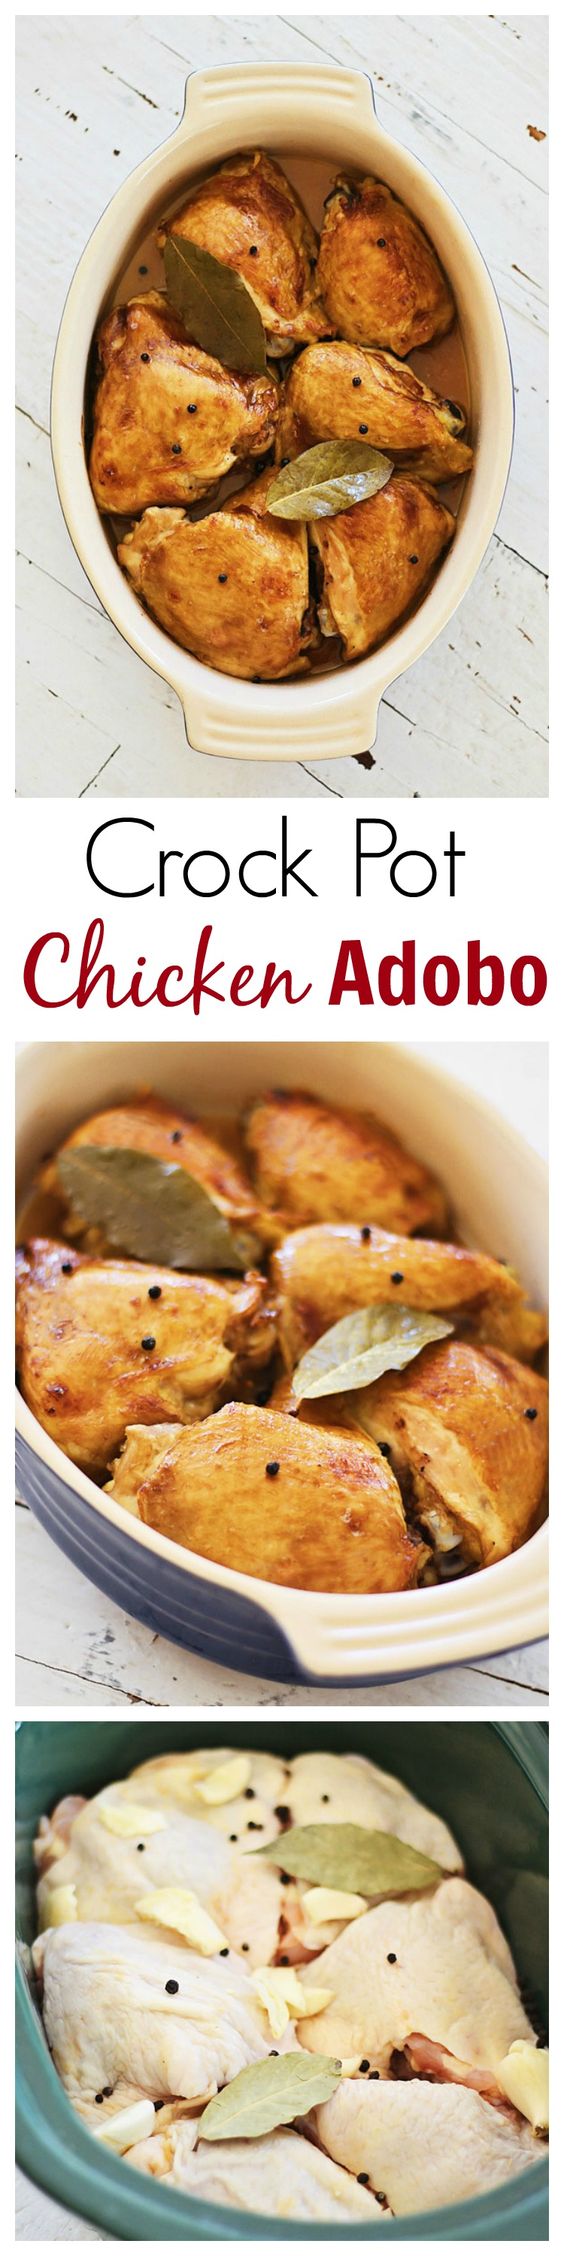 Crock Pot Chicken Adobo – the best and easiest chicken adobo in a crock pot. Just add the chicken, garlic and seasonings and dinner will be ready | rasamalaysia.com